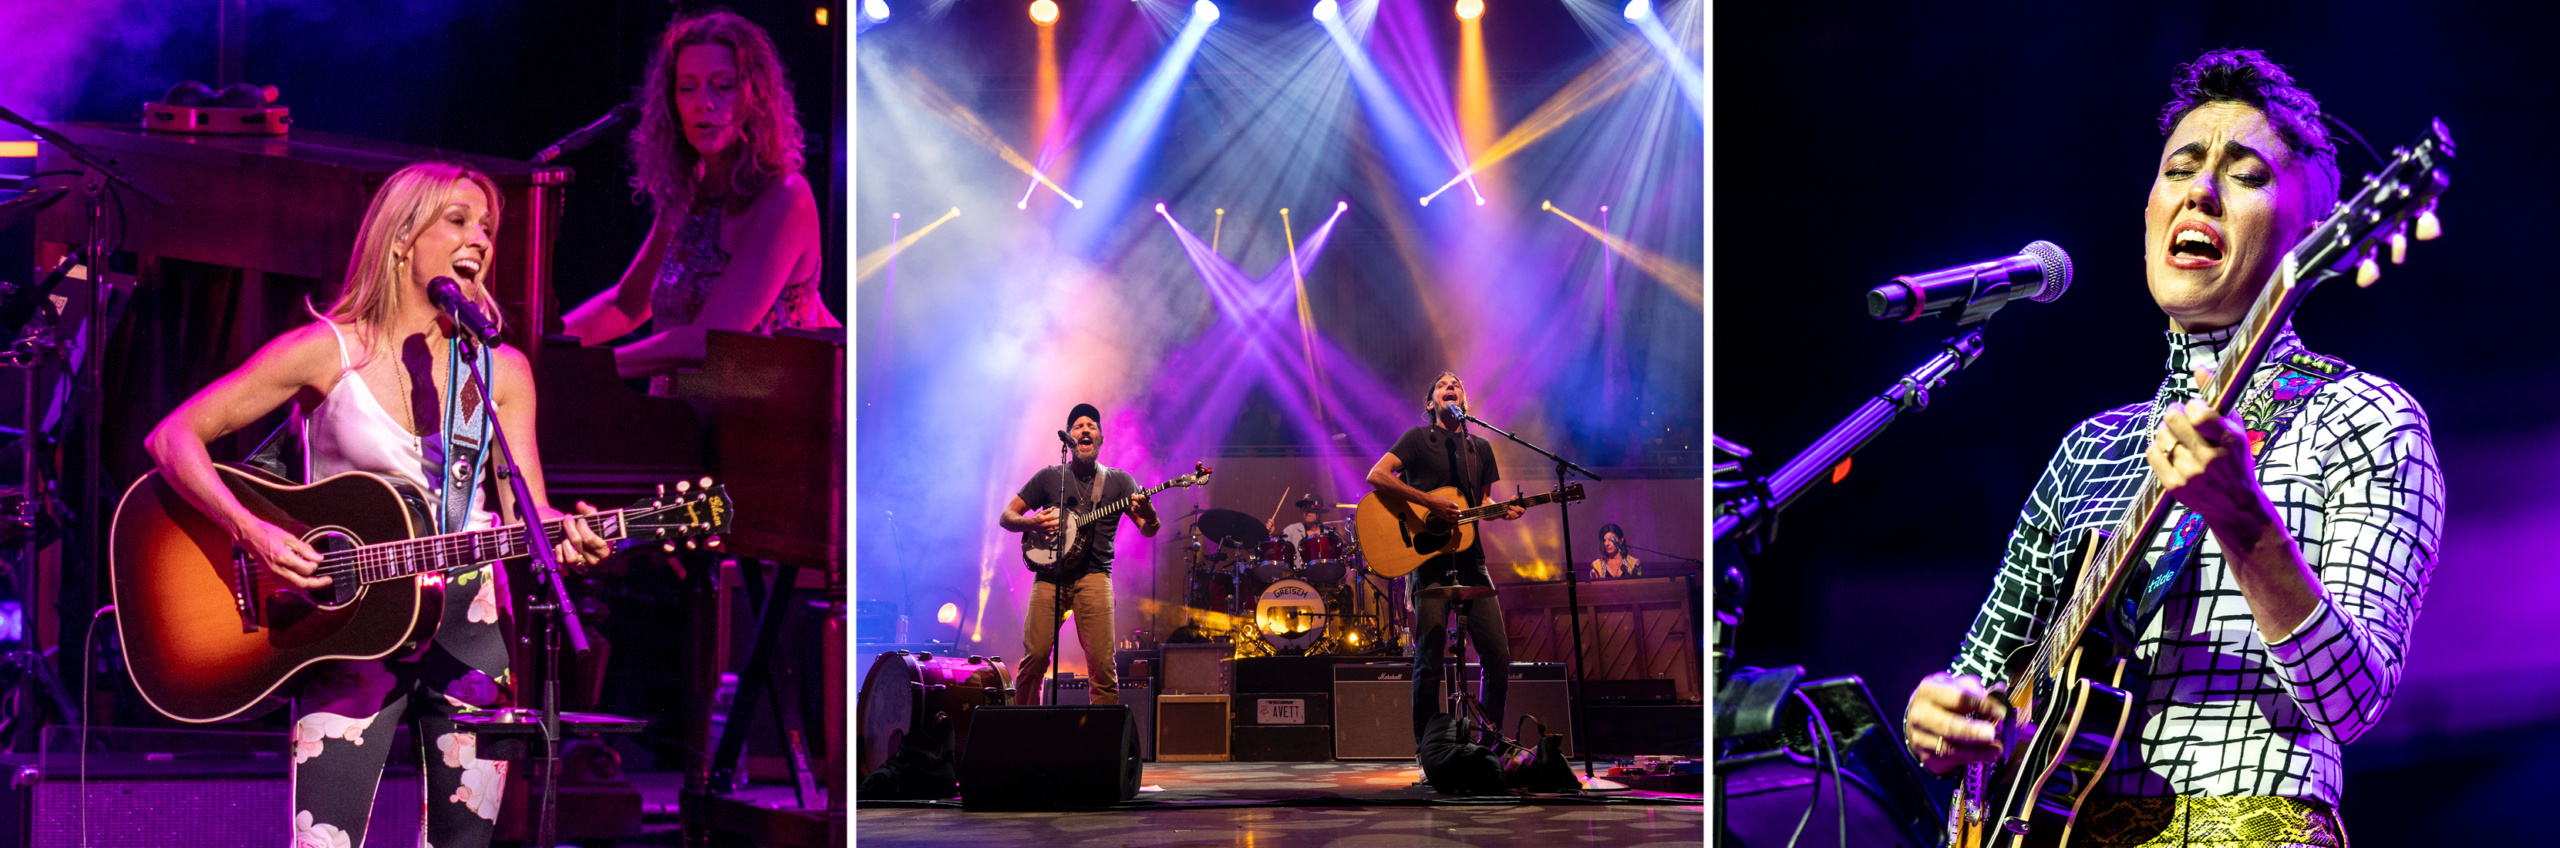 Sheryl Crow, The Avett Brothers and Gina Chavez performing at Chautauqua